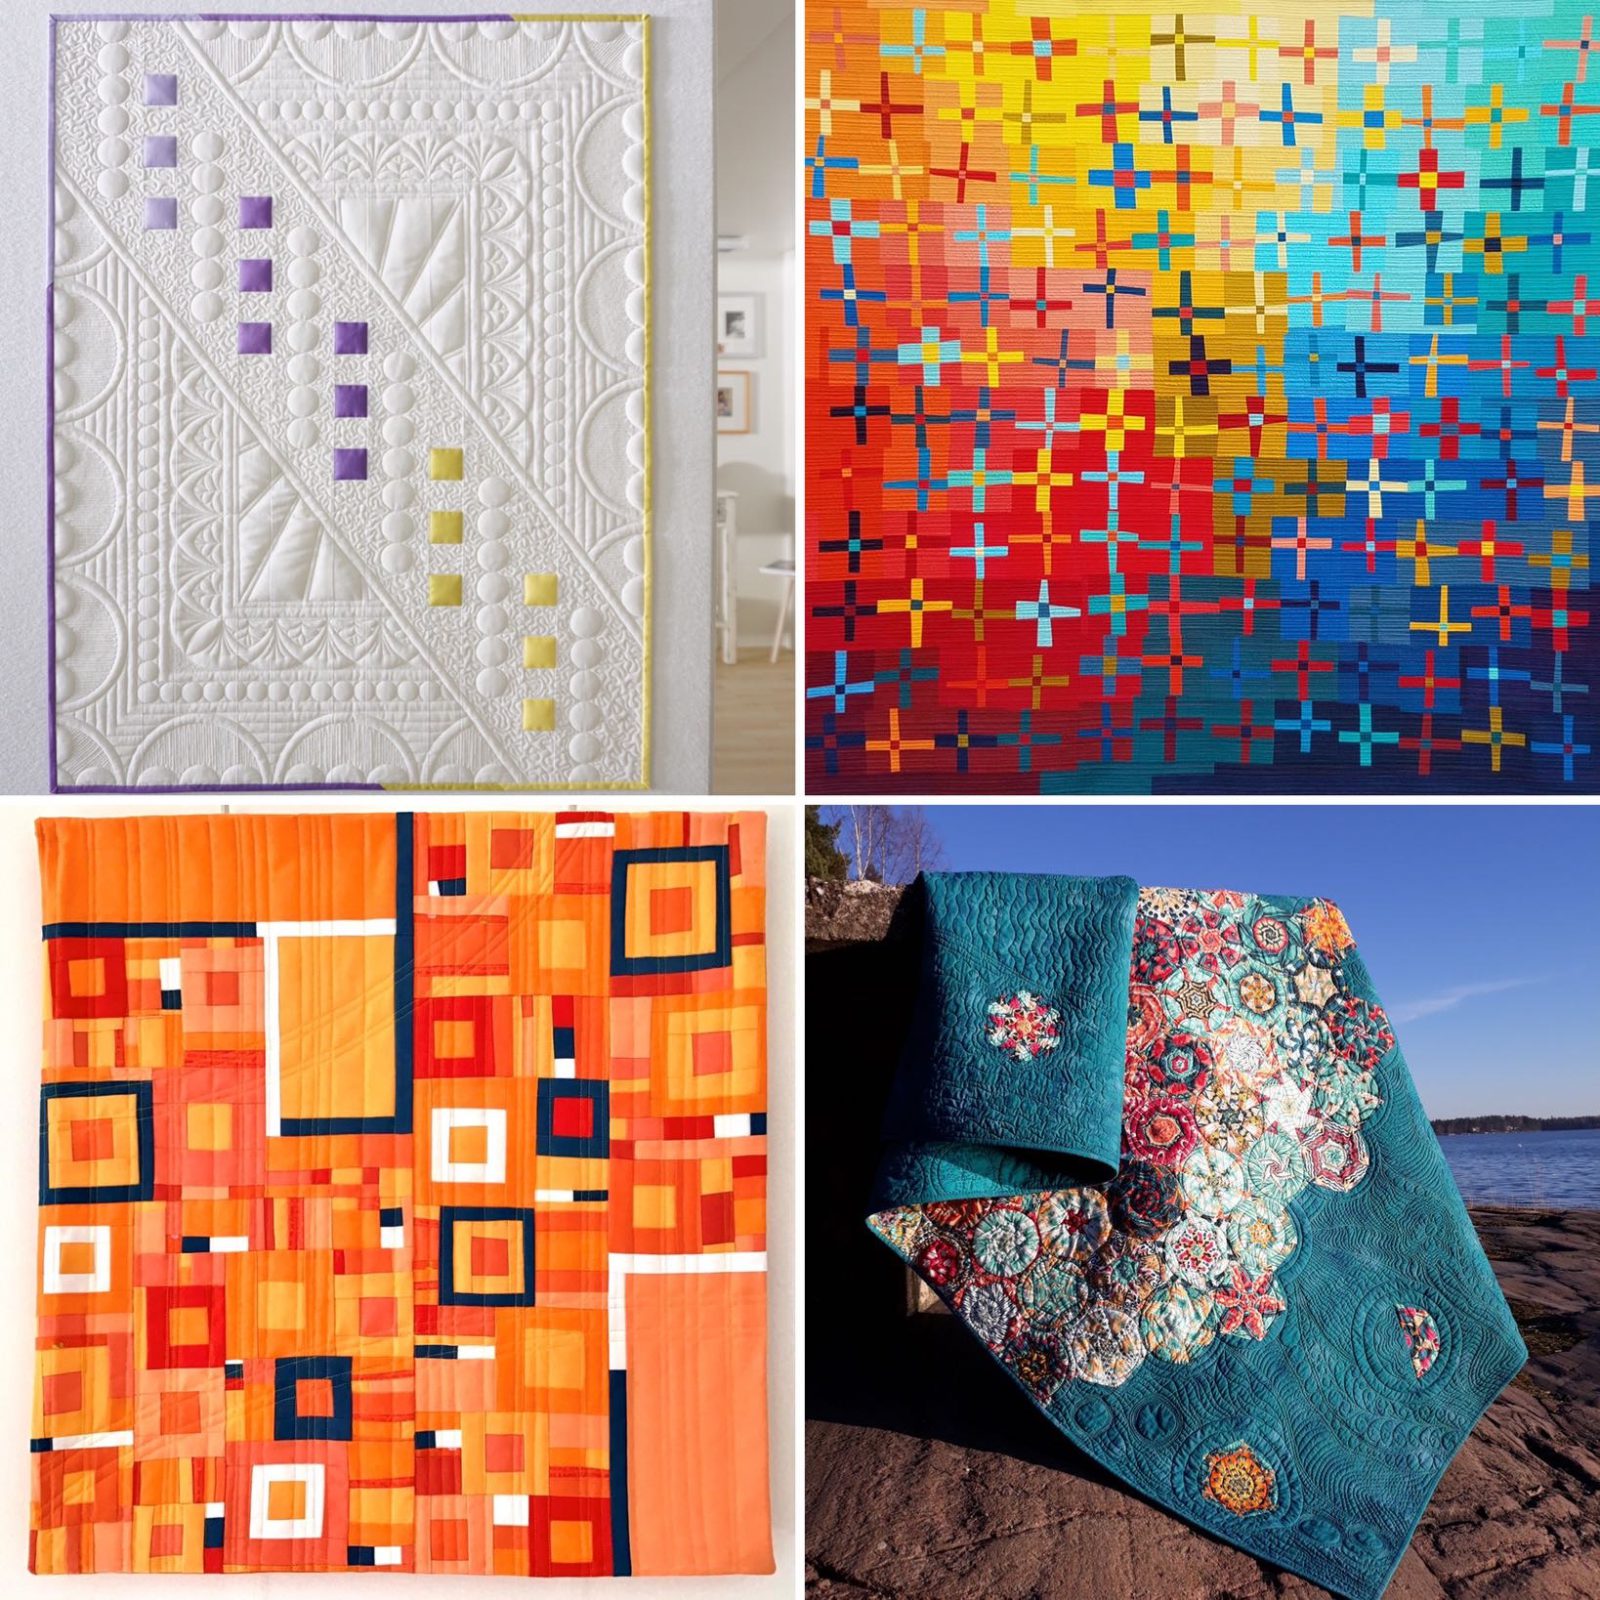 Gifts for Quilters - Sew Modern Quilts Gifts for quilters